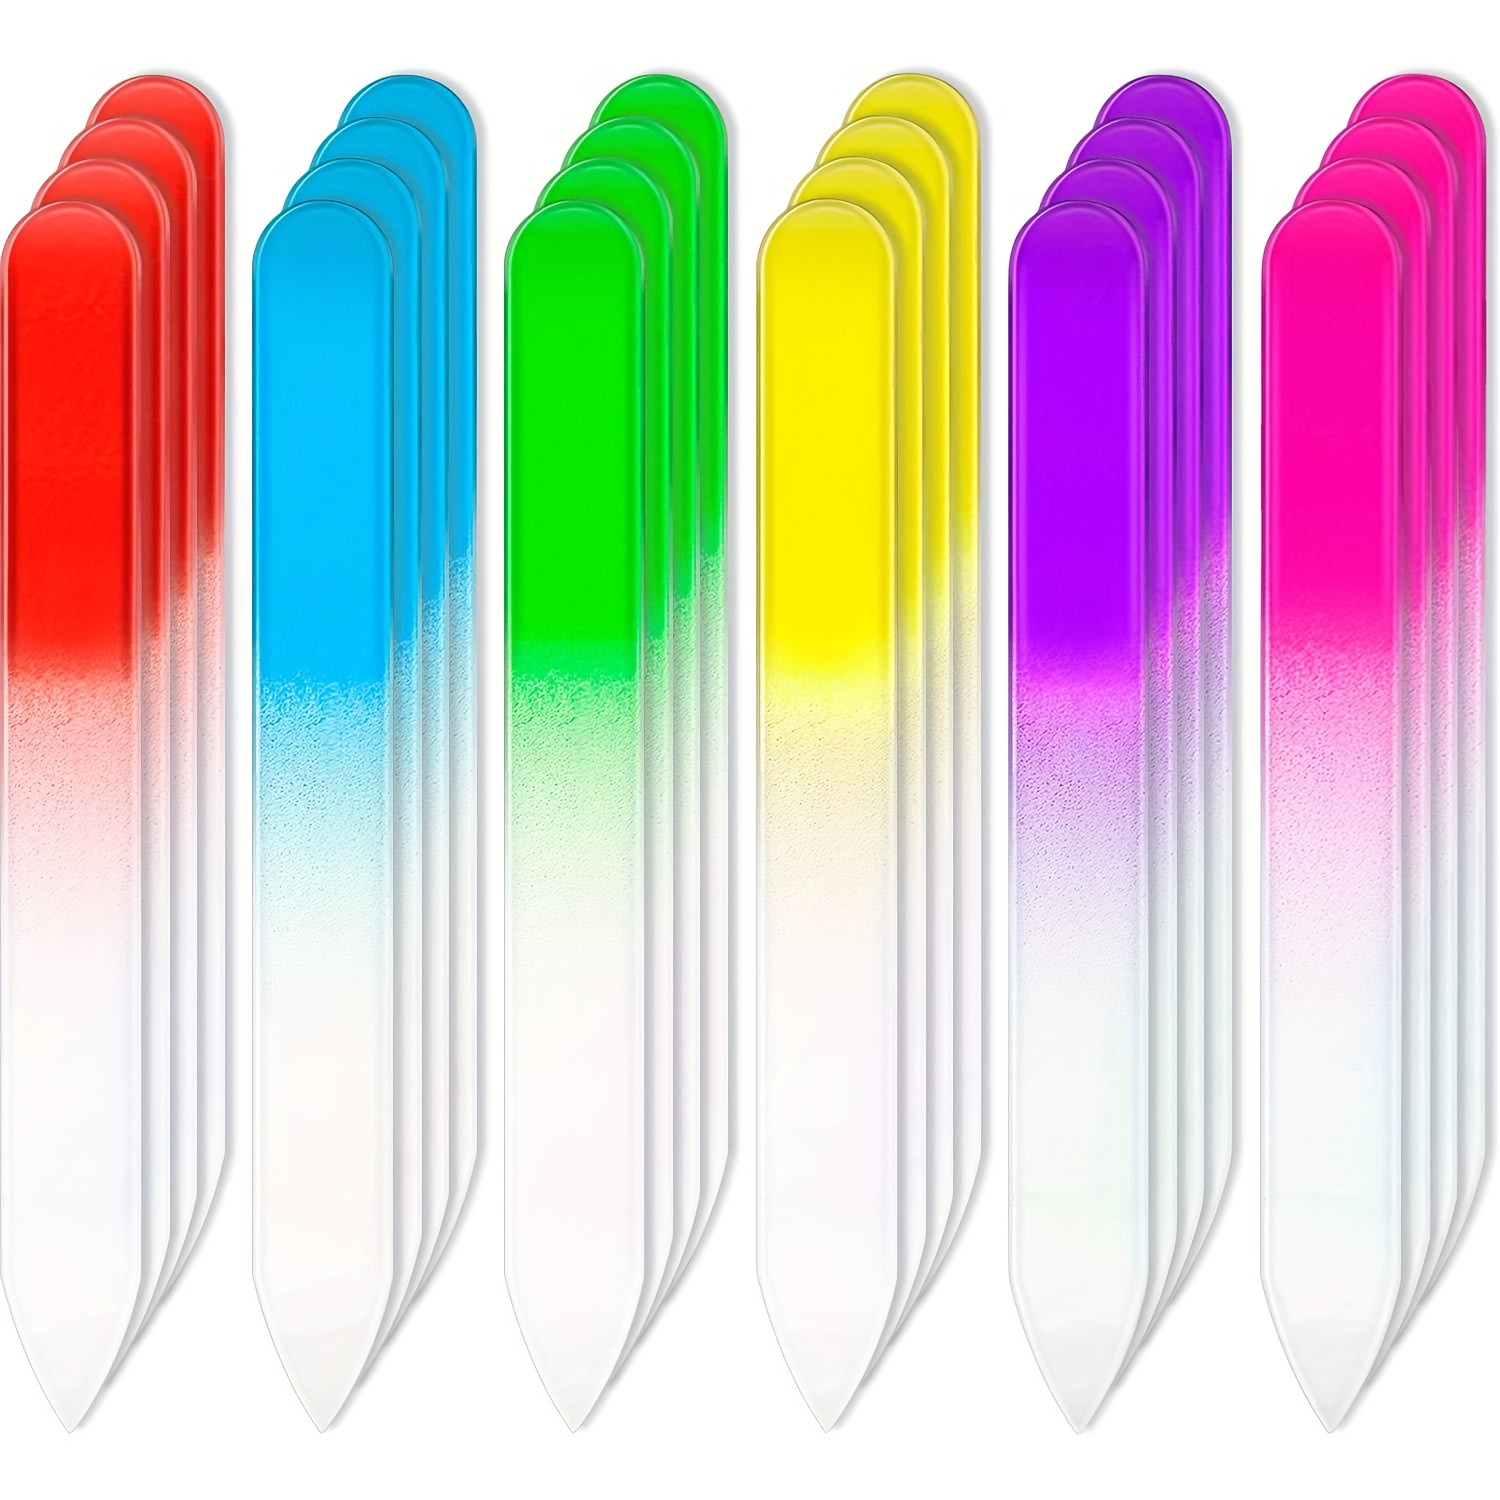 

24 Pcs Gradient Rainbow Glass Nail Files - Czech Crystal Glass Nail Files For Manicure And Nail Art - Buffing And Shaping Tools Set